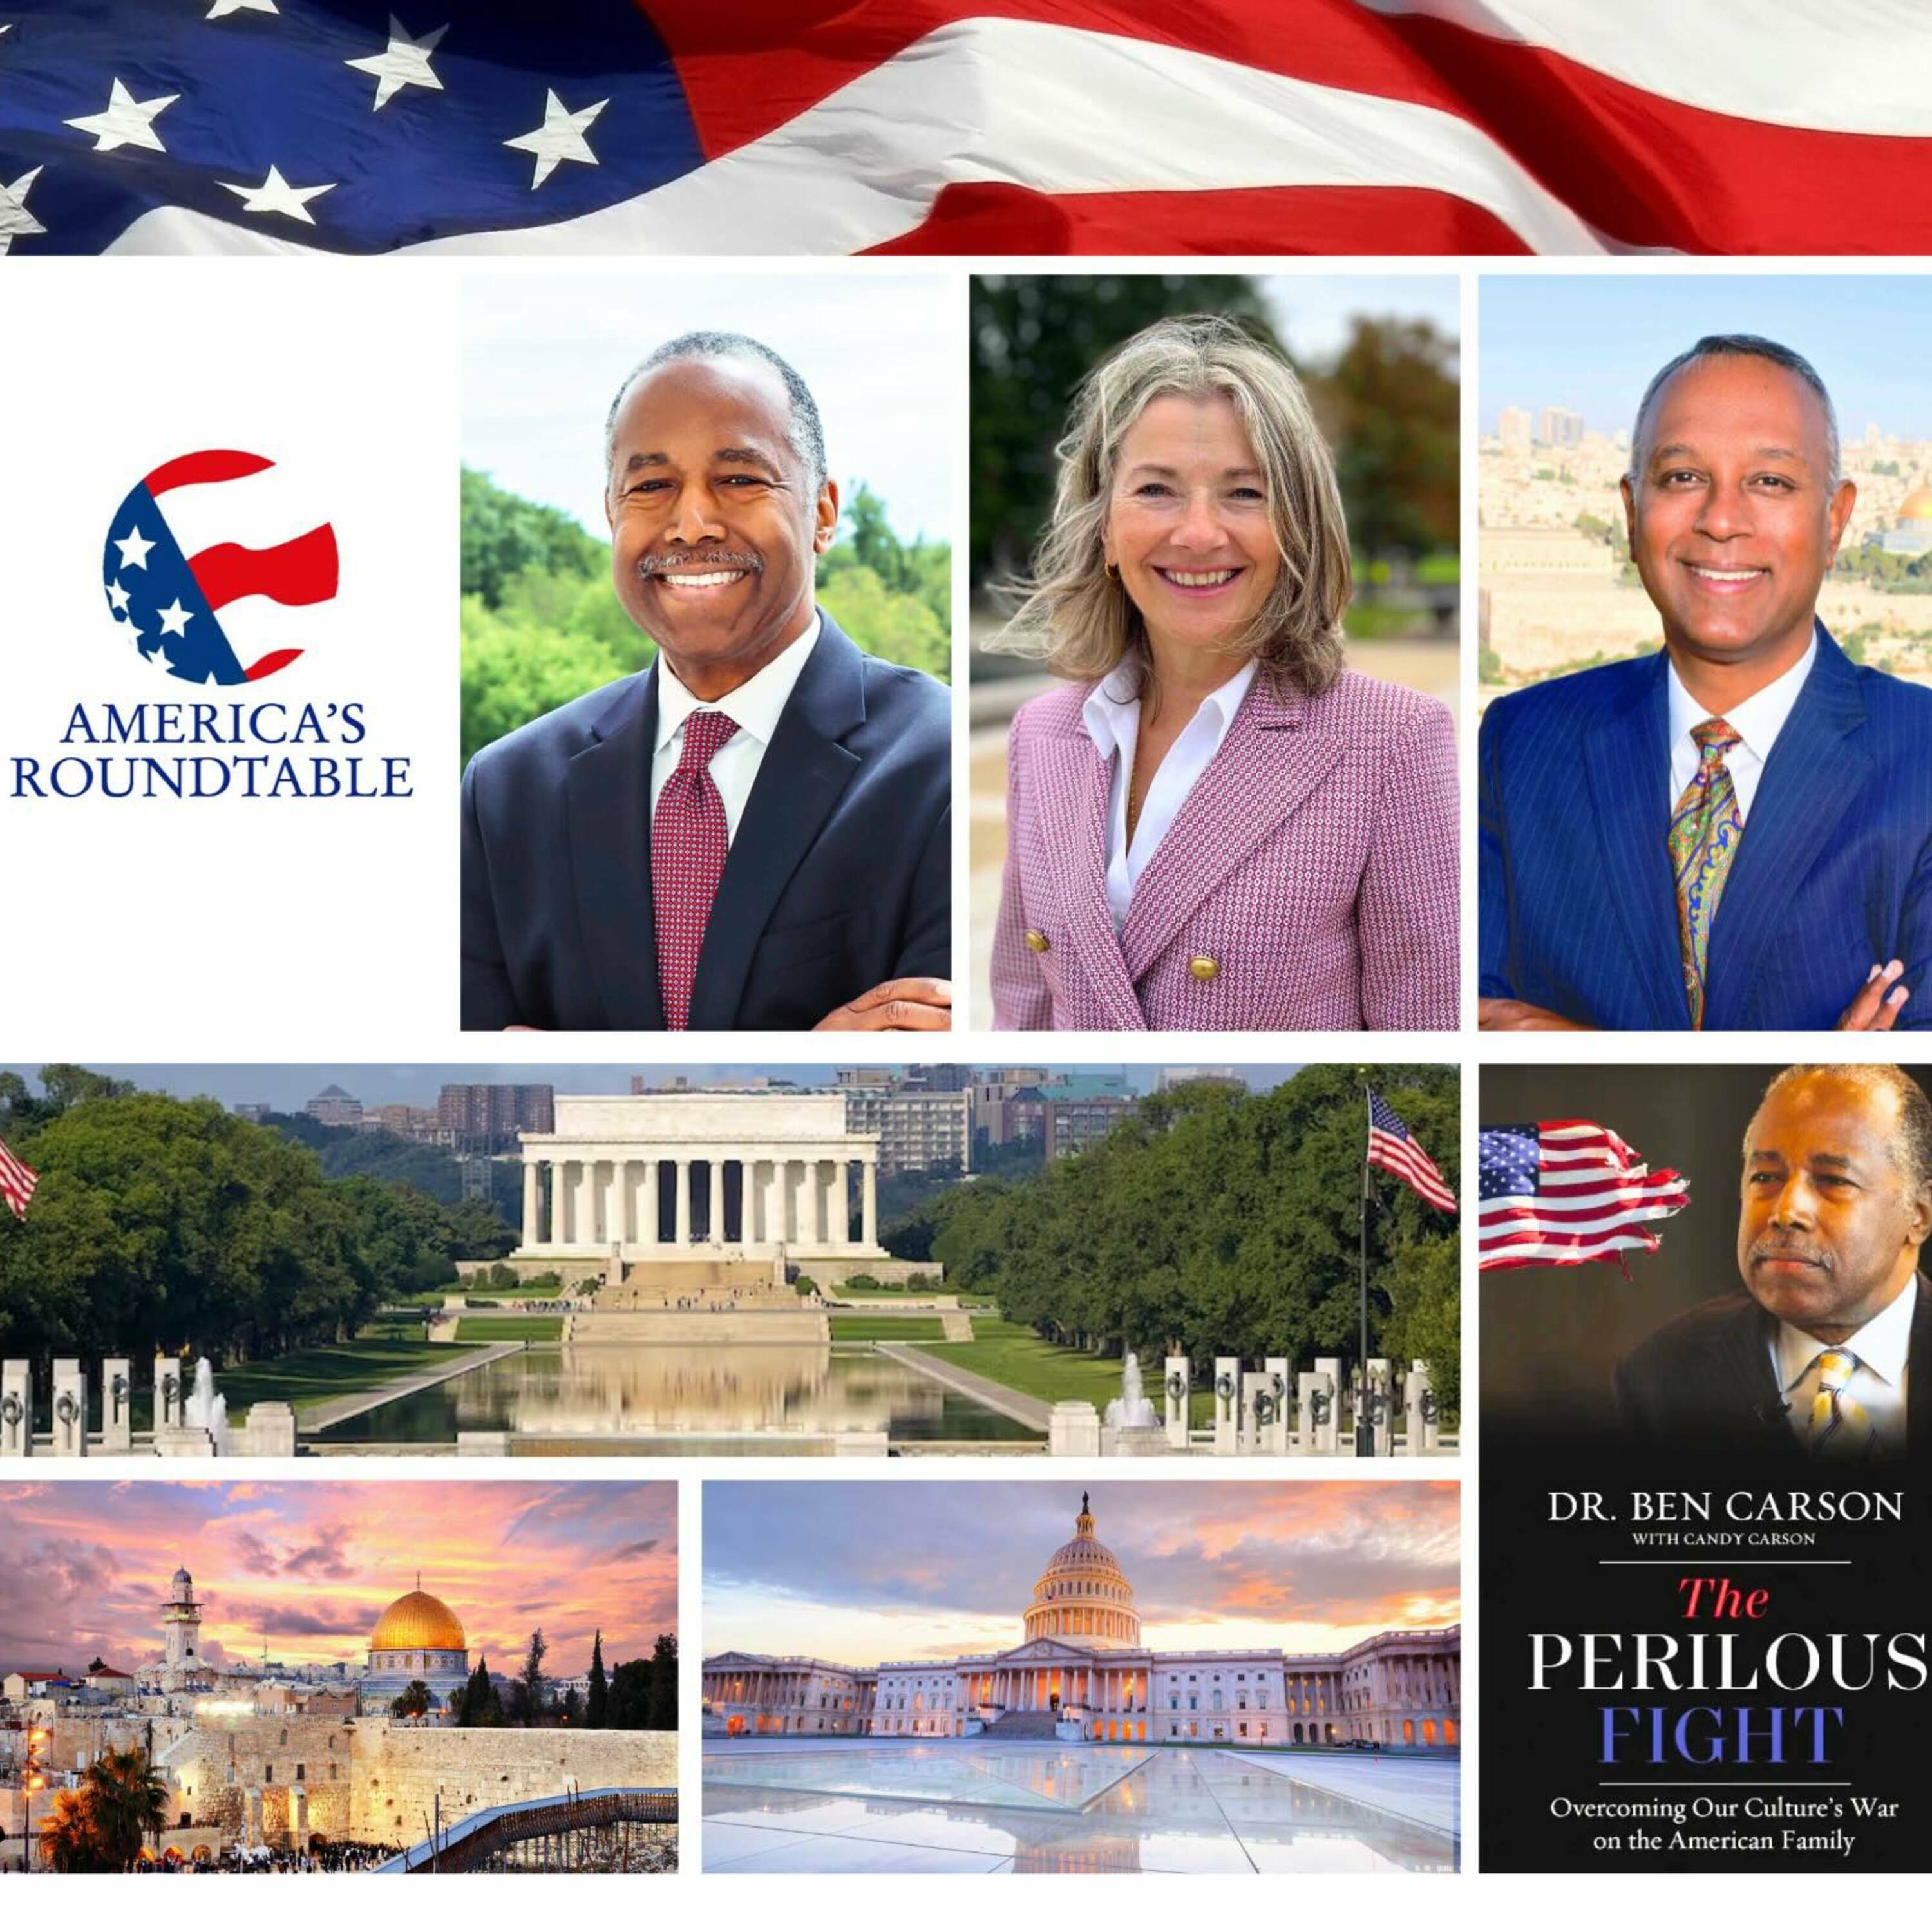 America's Roundtable with Dr. Ben Carson | "The Perilous Fight: Overcoming Our Culture's War on the American Family" | Reading of the U.S. Declaration of Independence